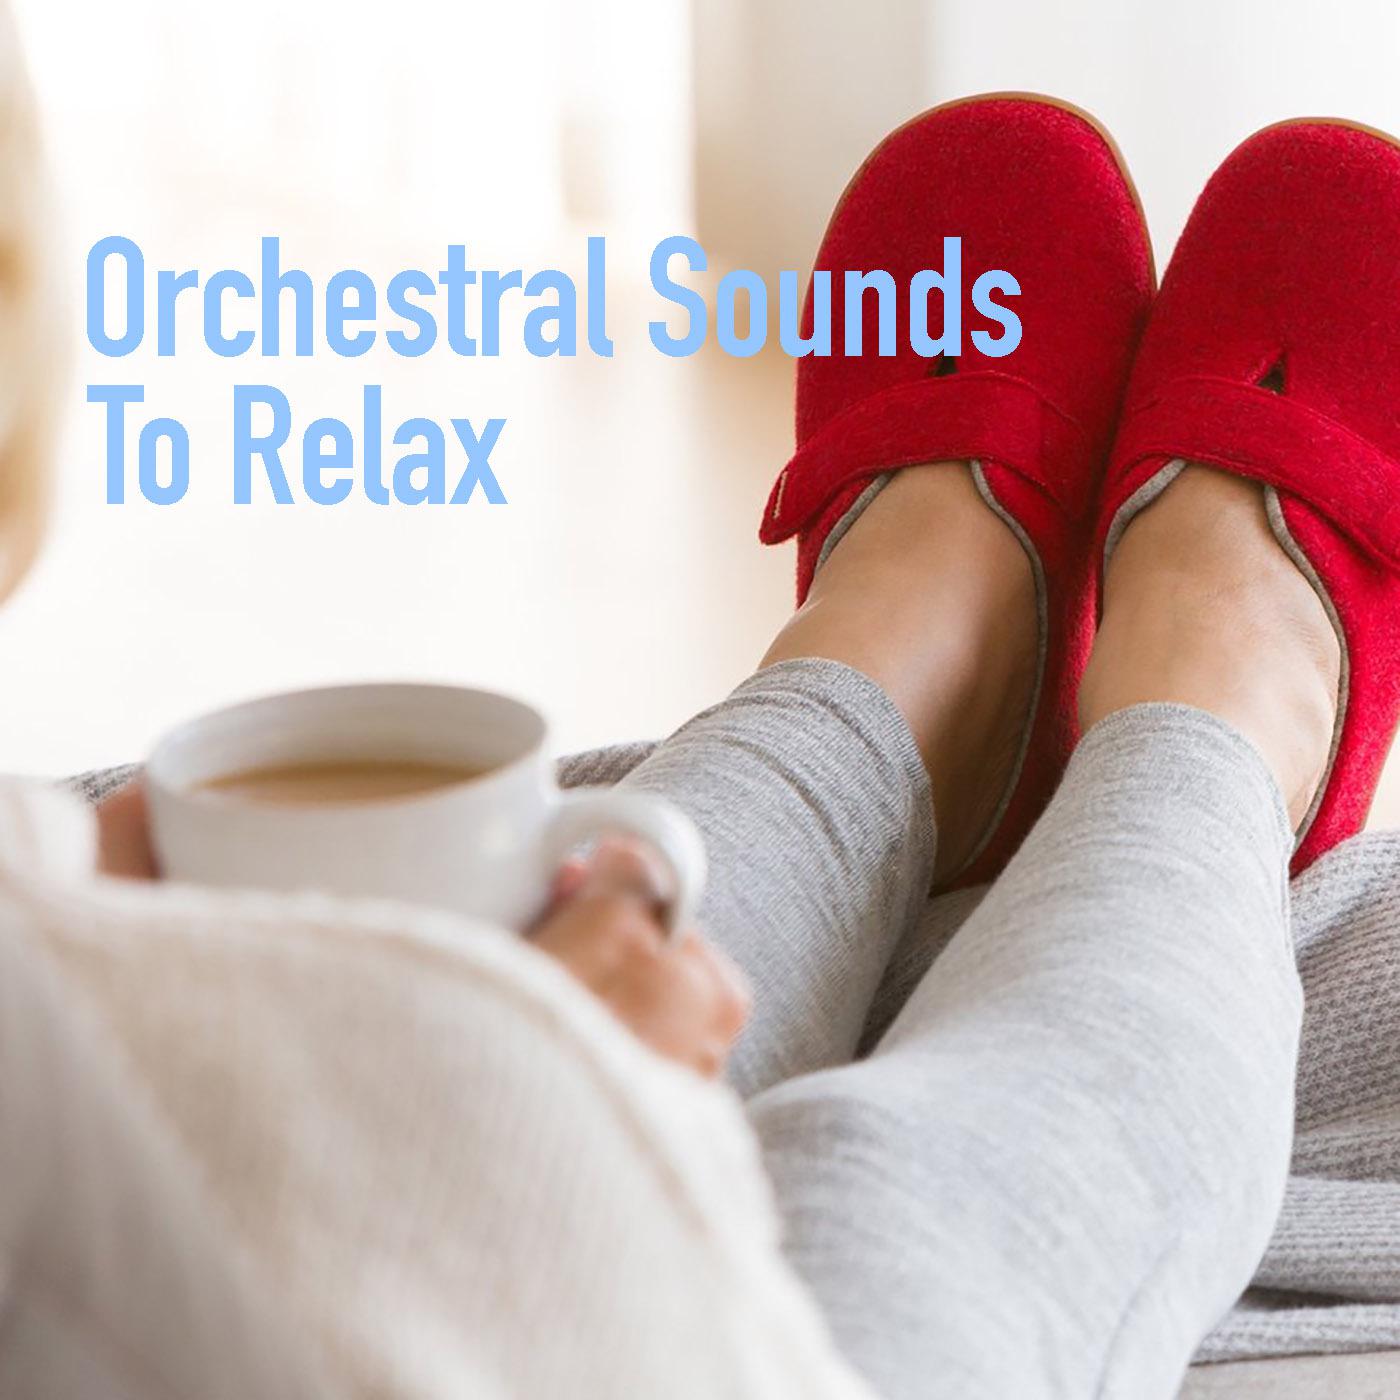 Orchestral Sounds To Relax